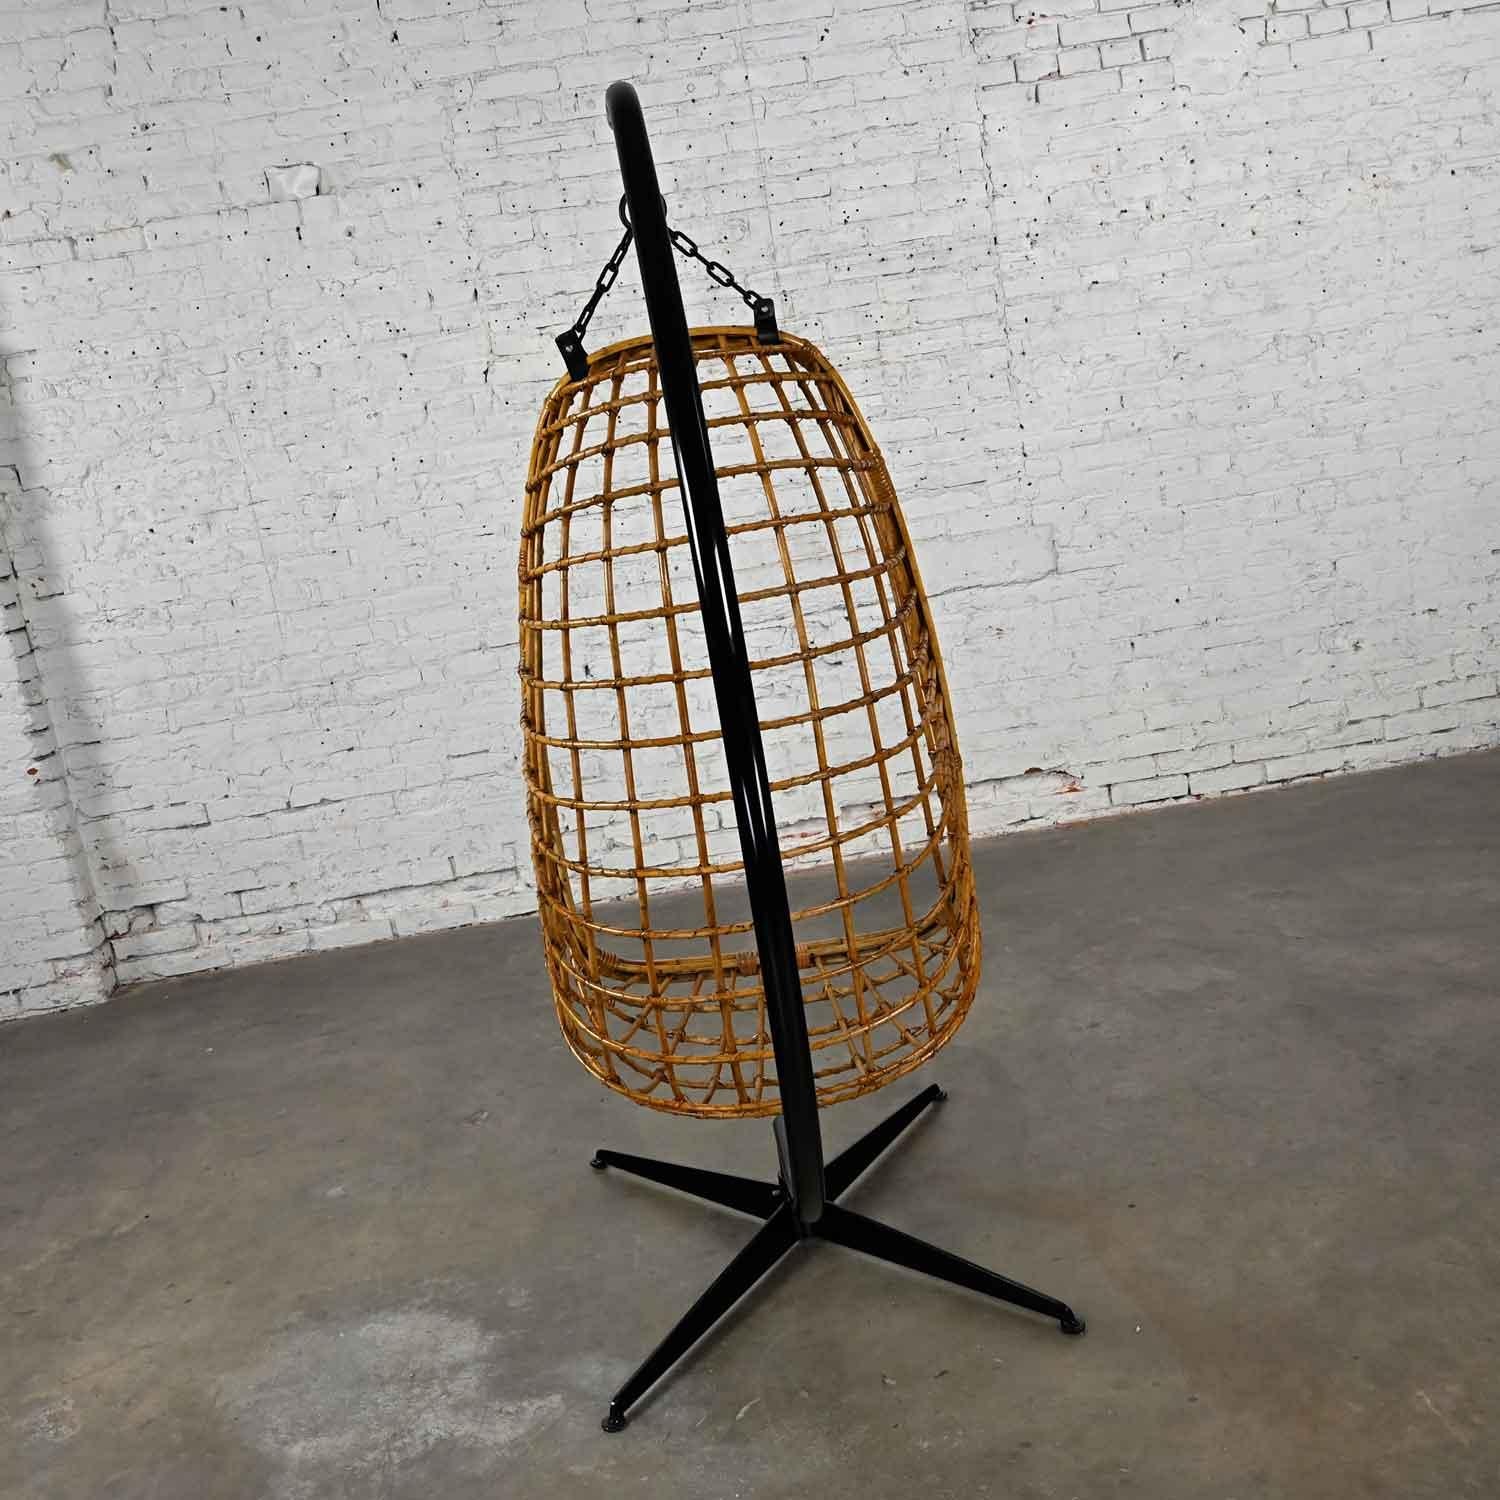 20th Century Mid-Century Modern Wicker Rattan Hanging Basket Chair & Black Painted Stand